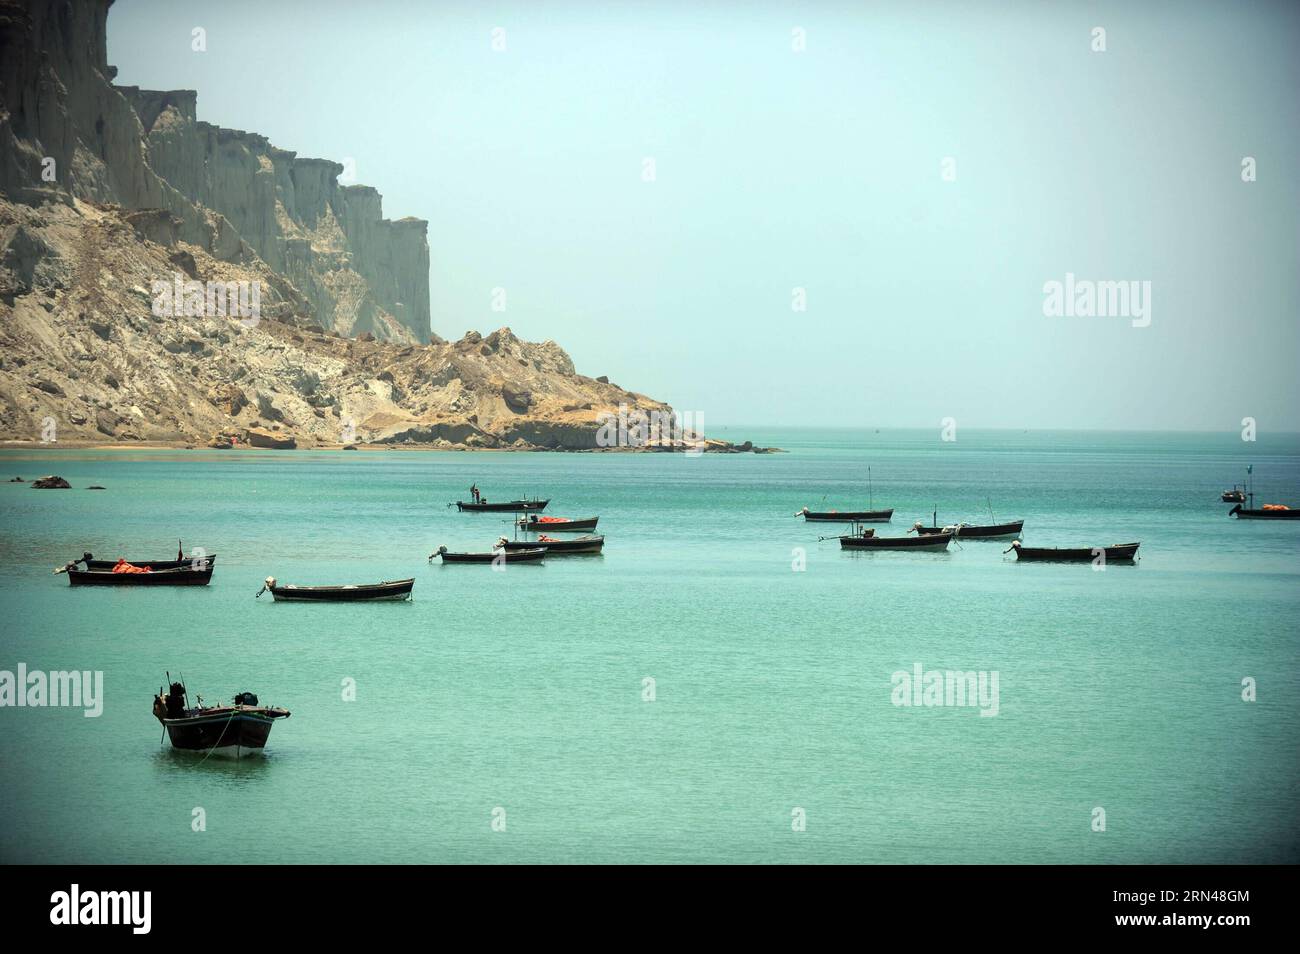 (150512) -- KARACHI,   -- Fishboats berth in the bay of Gwadar, southwestern Pakistan, on May 11, 2015. Most of local residents in Gwadar live on fishing. Gwadar Port, a warm-water, deep-sea port, is located at the mouth of the Persian Gulf in Gwadar of Pakistan s Baloschistan province. China and Pakistan agreed to build China-Pakistan Economic Corridor (CPEC) to connect the Pakistani port with Kashgar city in China s Xinjiang Uygur Autonomous Region. It will shorten China s routes of oil and gas imports from Africa and the Middle East for thousands of kilometers, making Gwadar a potentially v Stock Photo